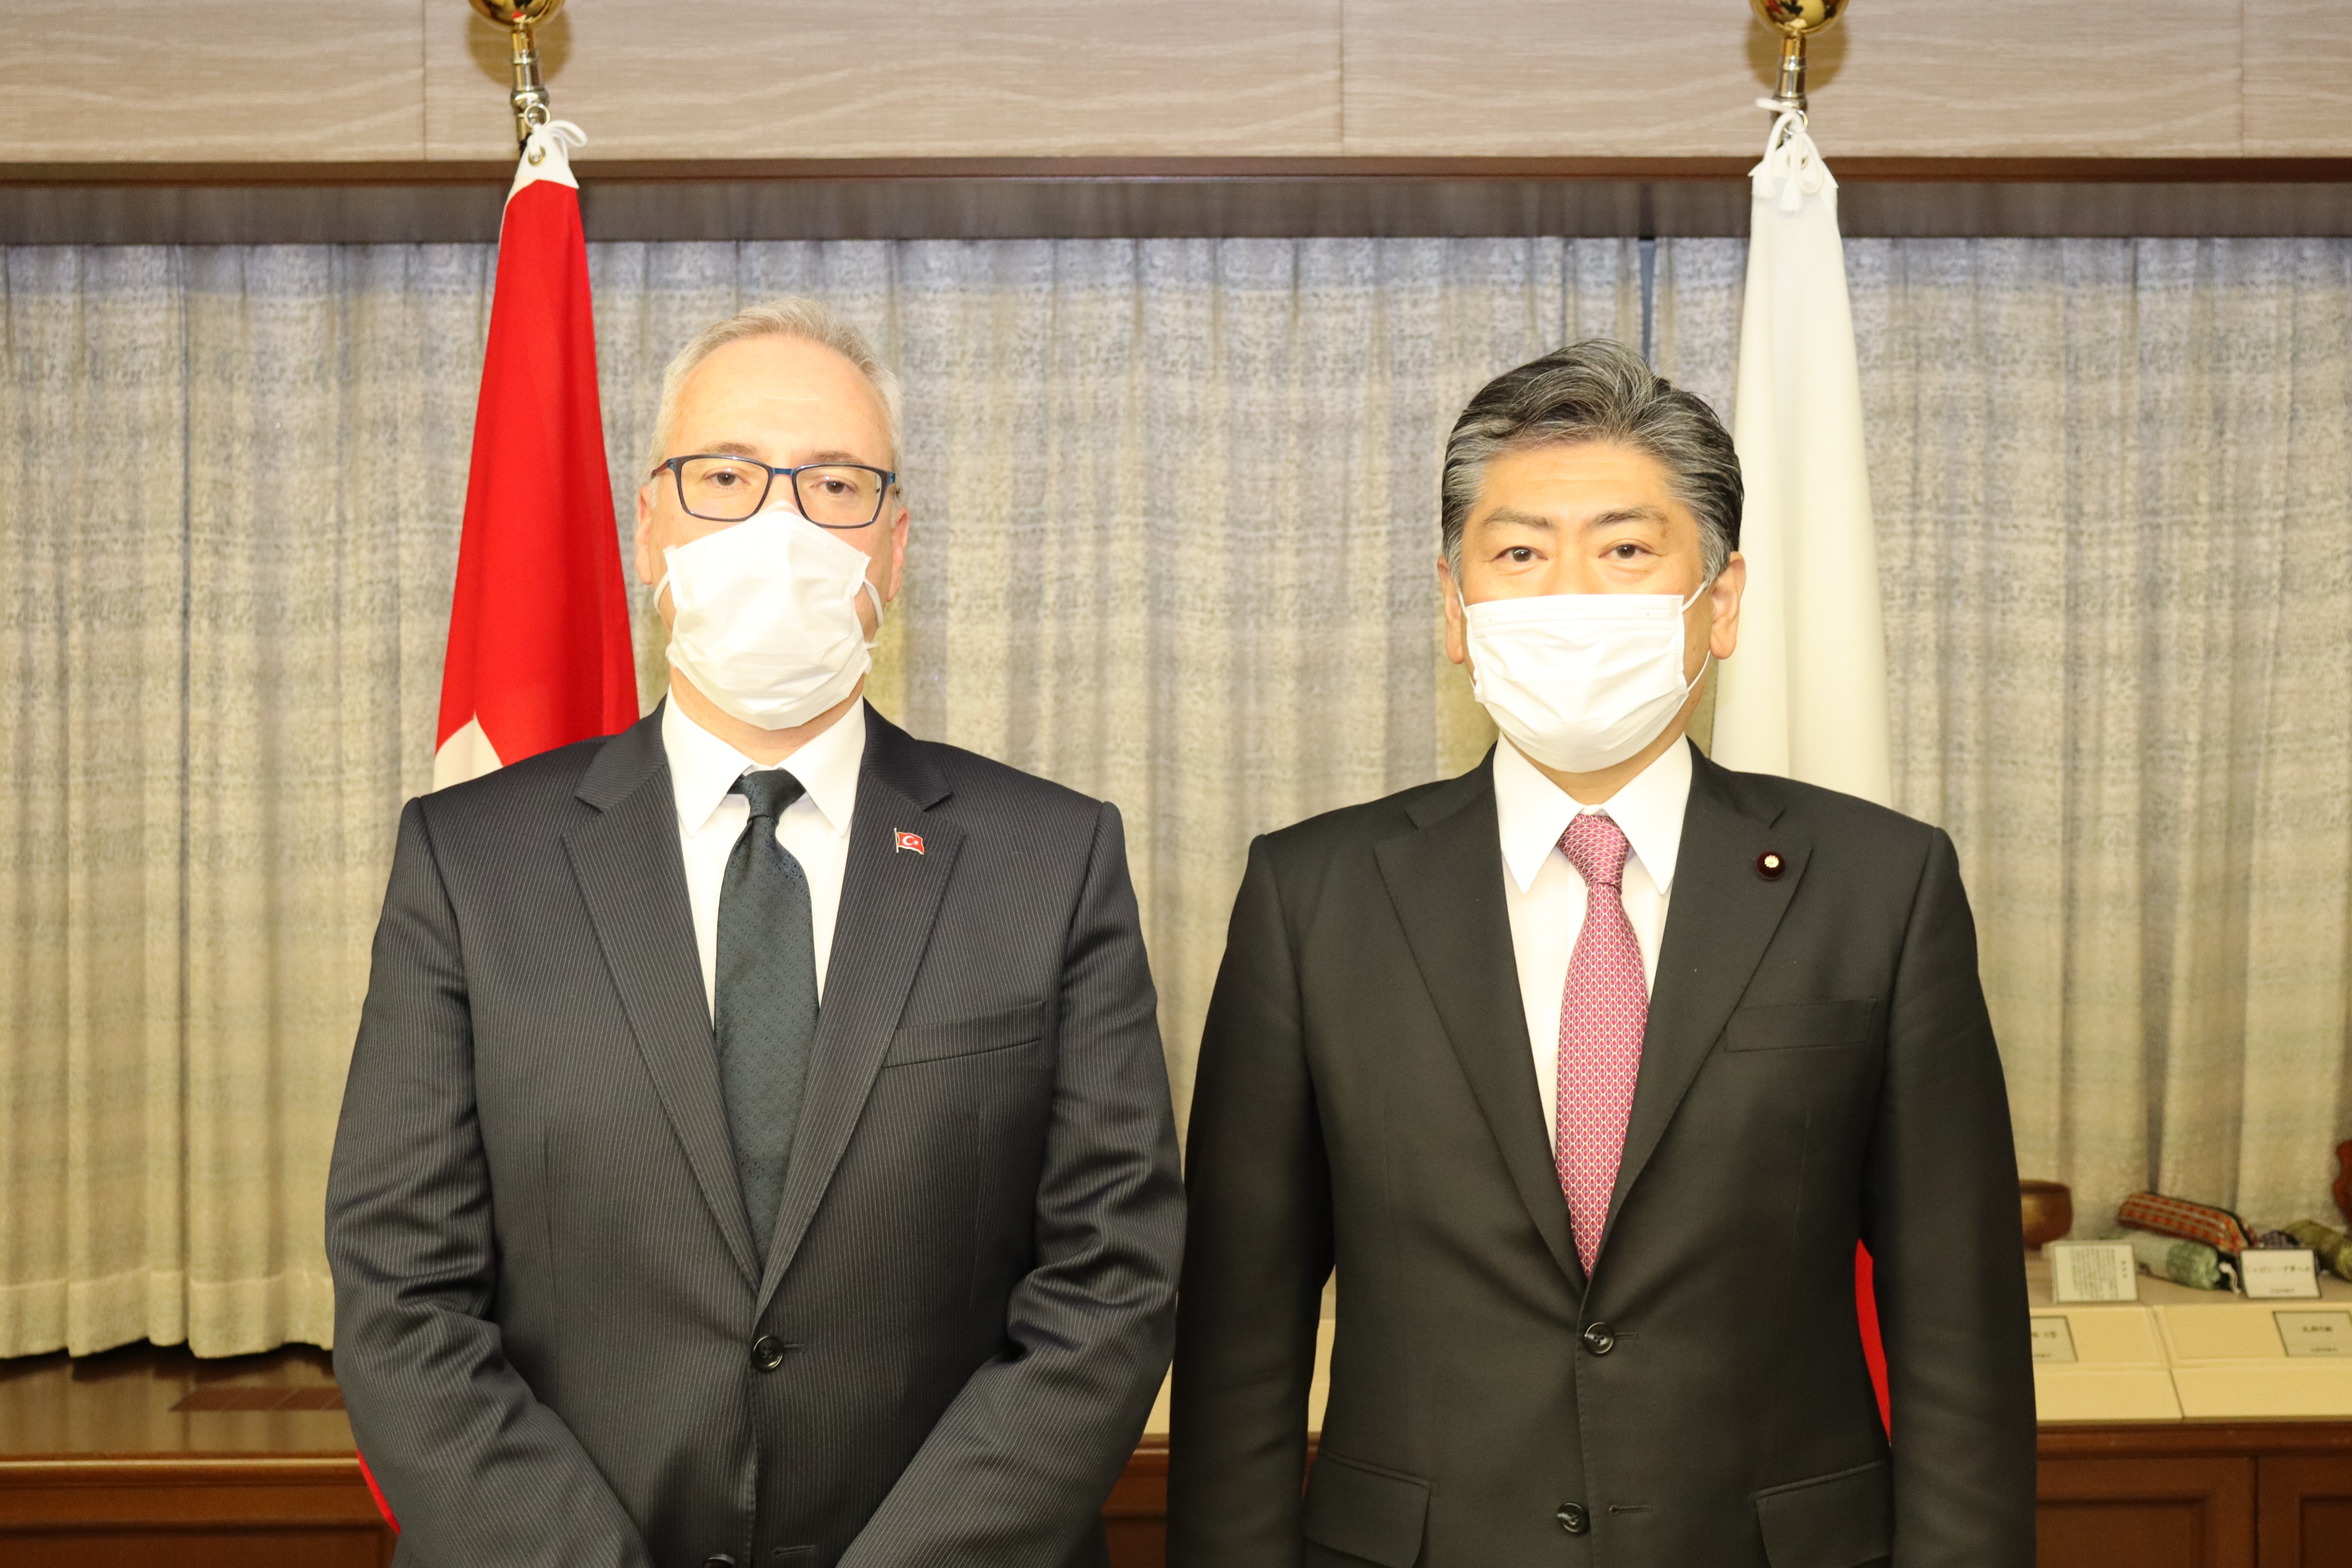 March 1, 2022 Justice Minister Received Courtesy Call from Ambassador of the Republic of Turkey to Japan